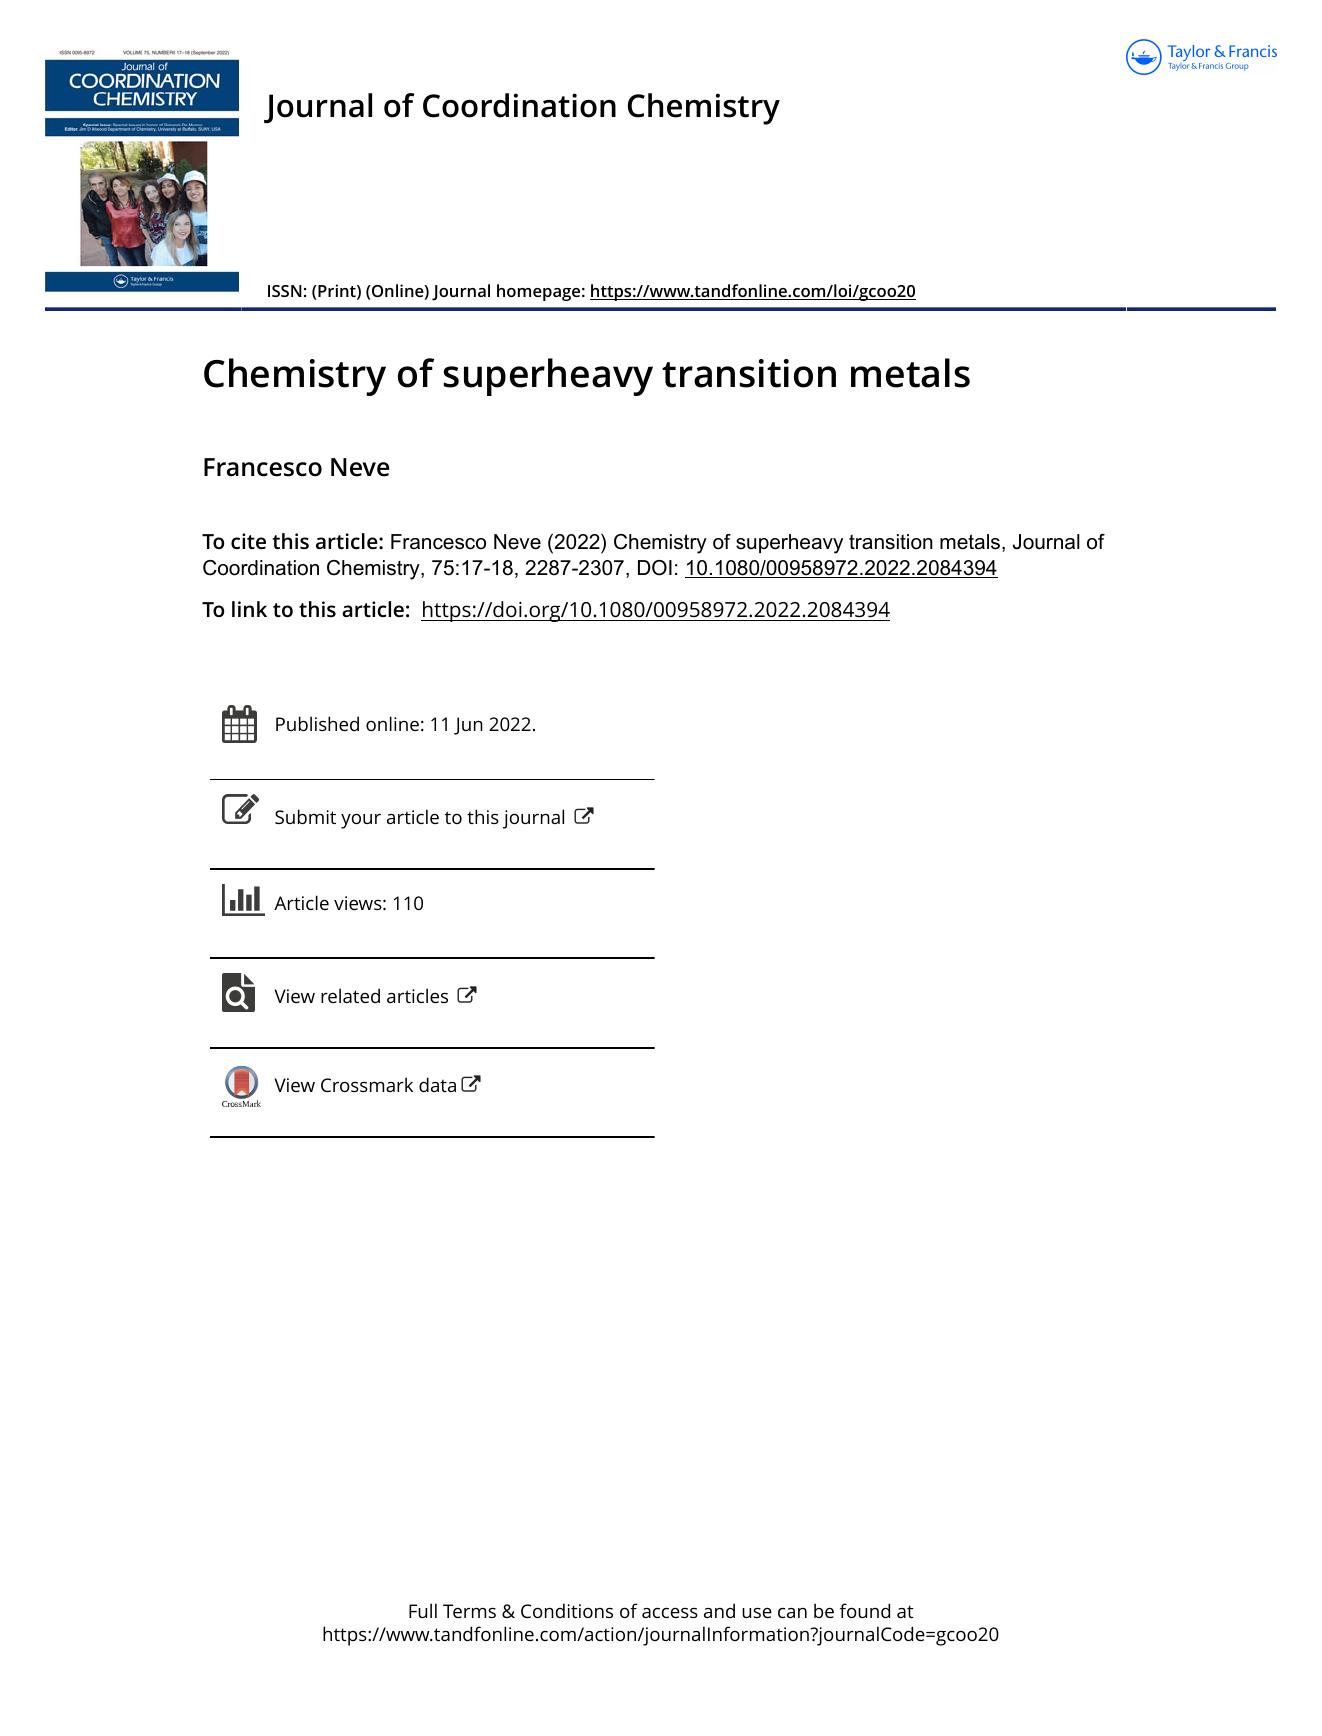 Chemistry of superheavy transition metals by Neve Francesco